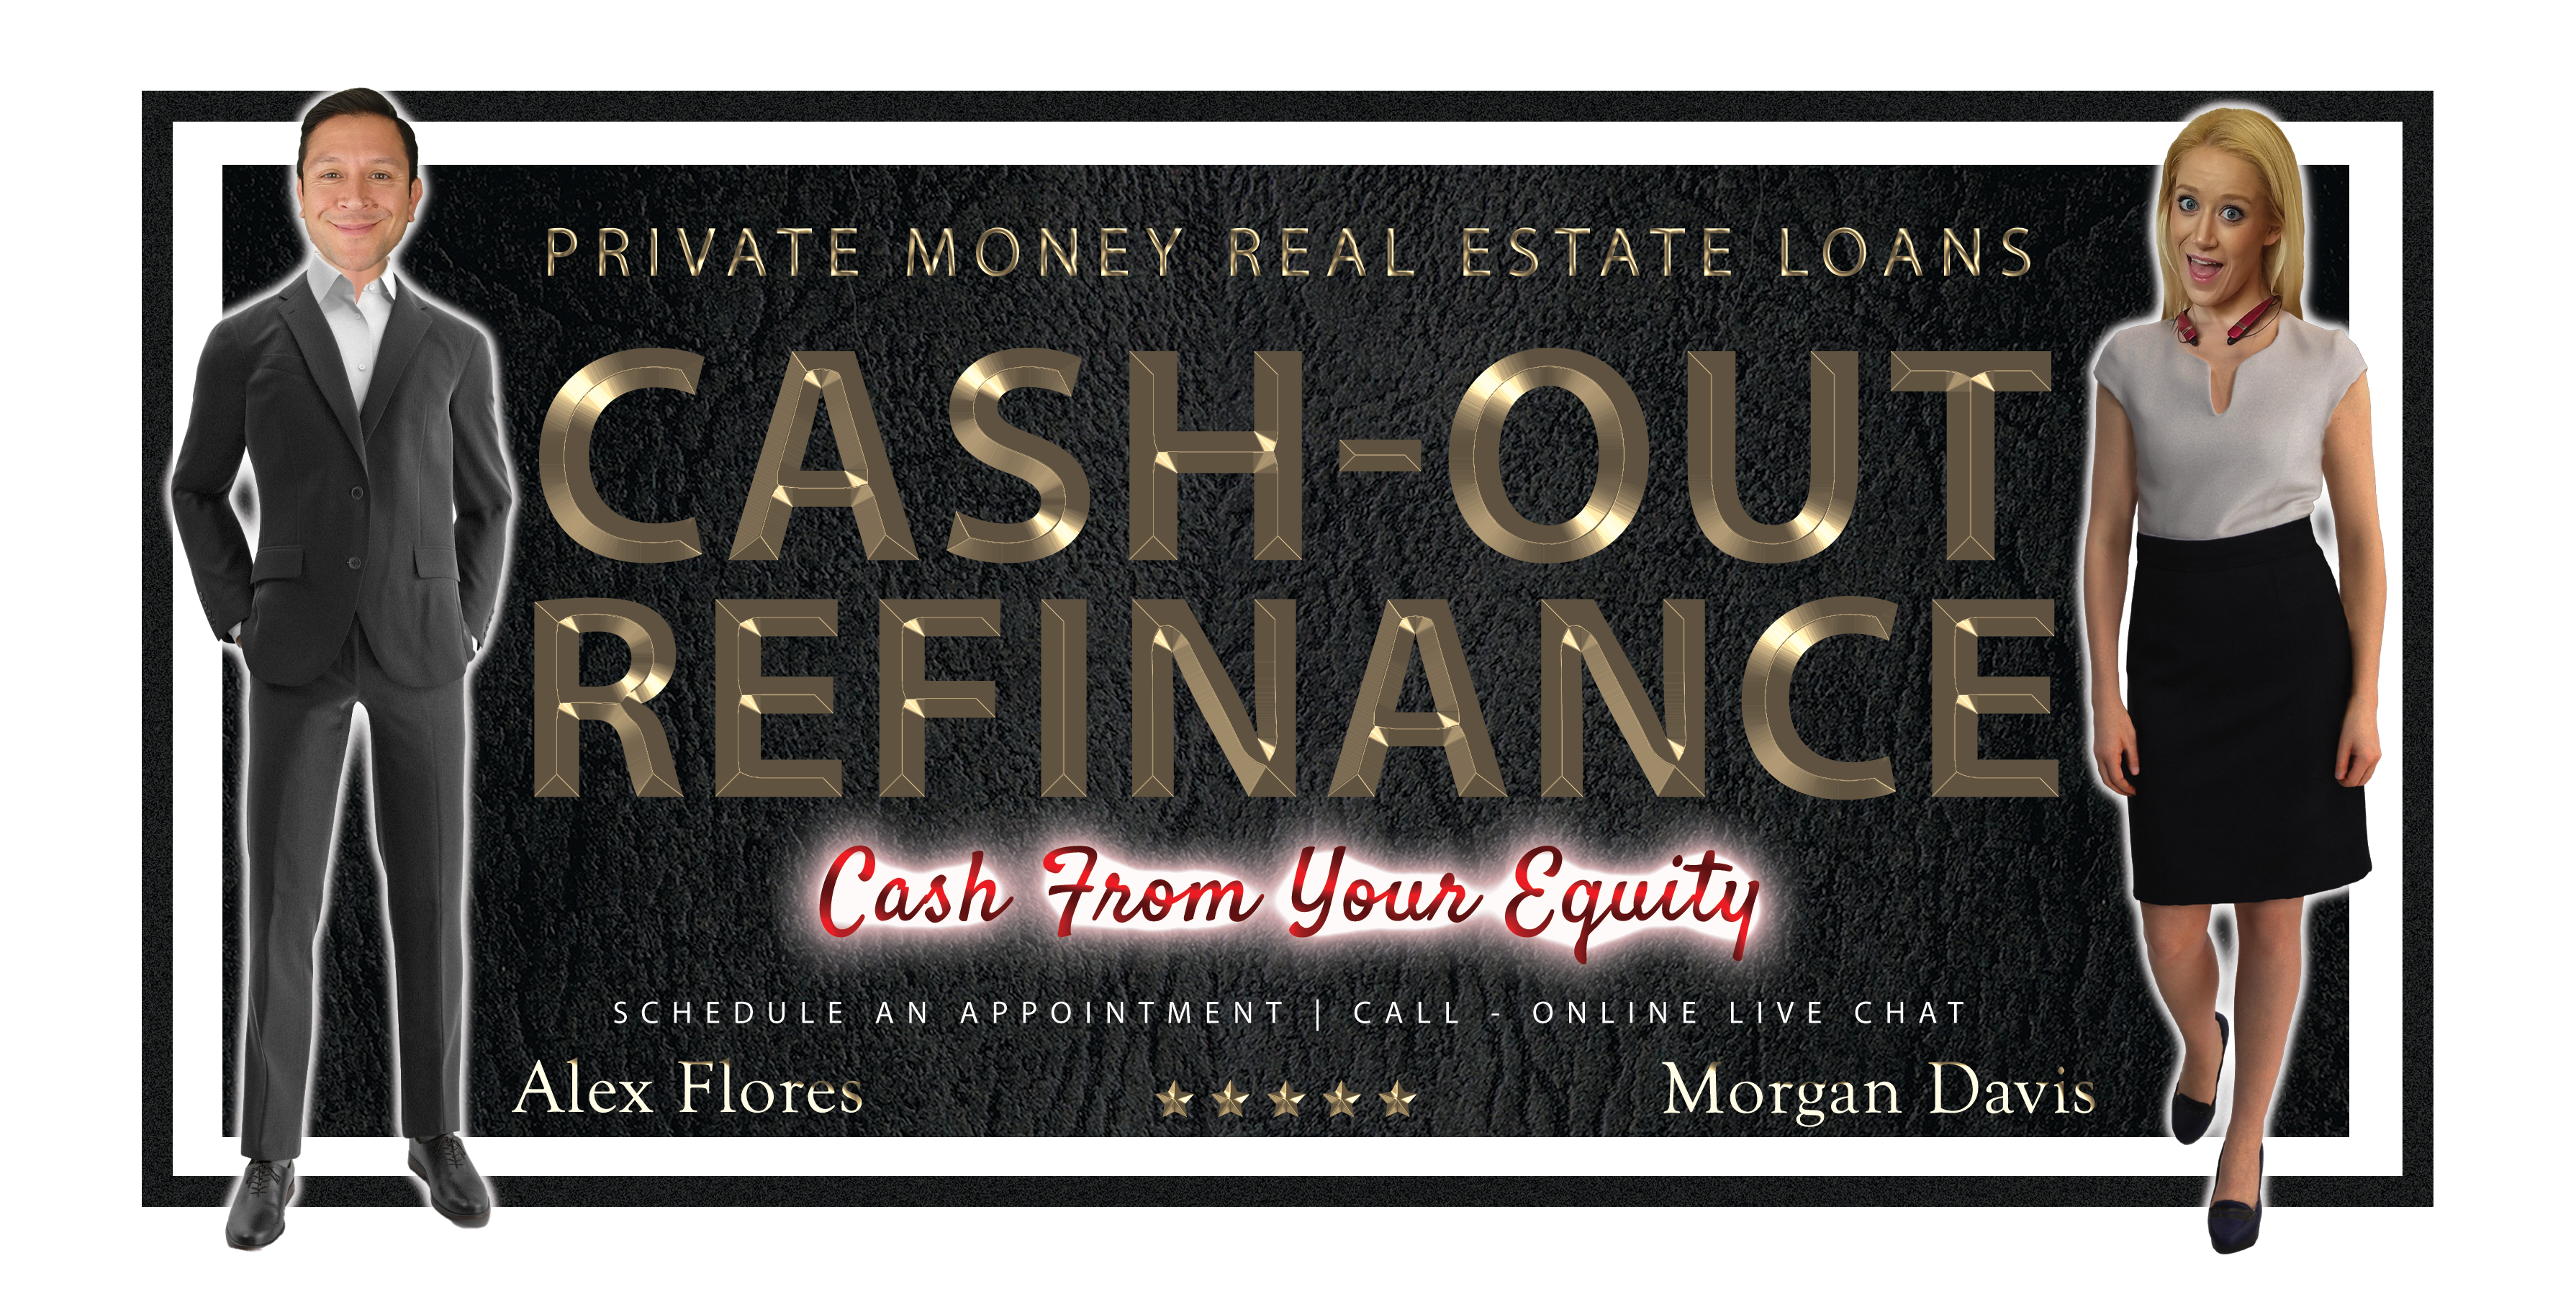 Private Lender Team in Houston Texas - Cash Out Refinance for Real Estate